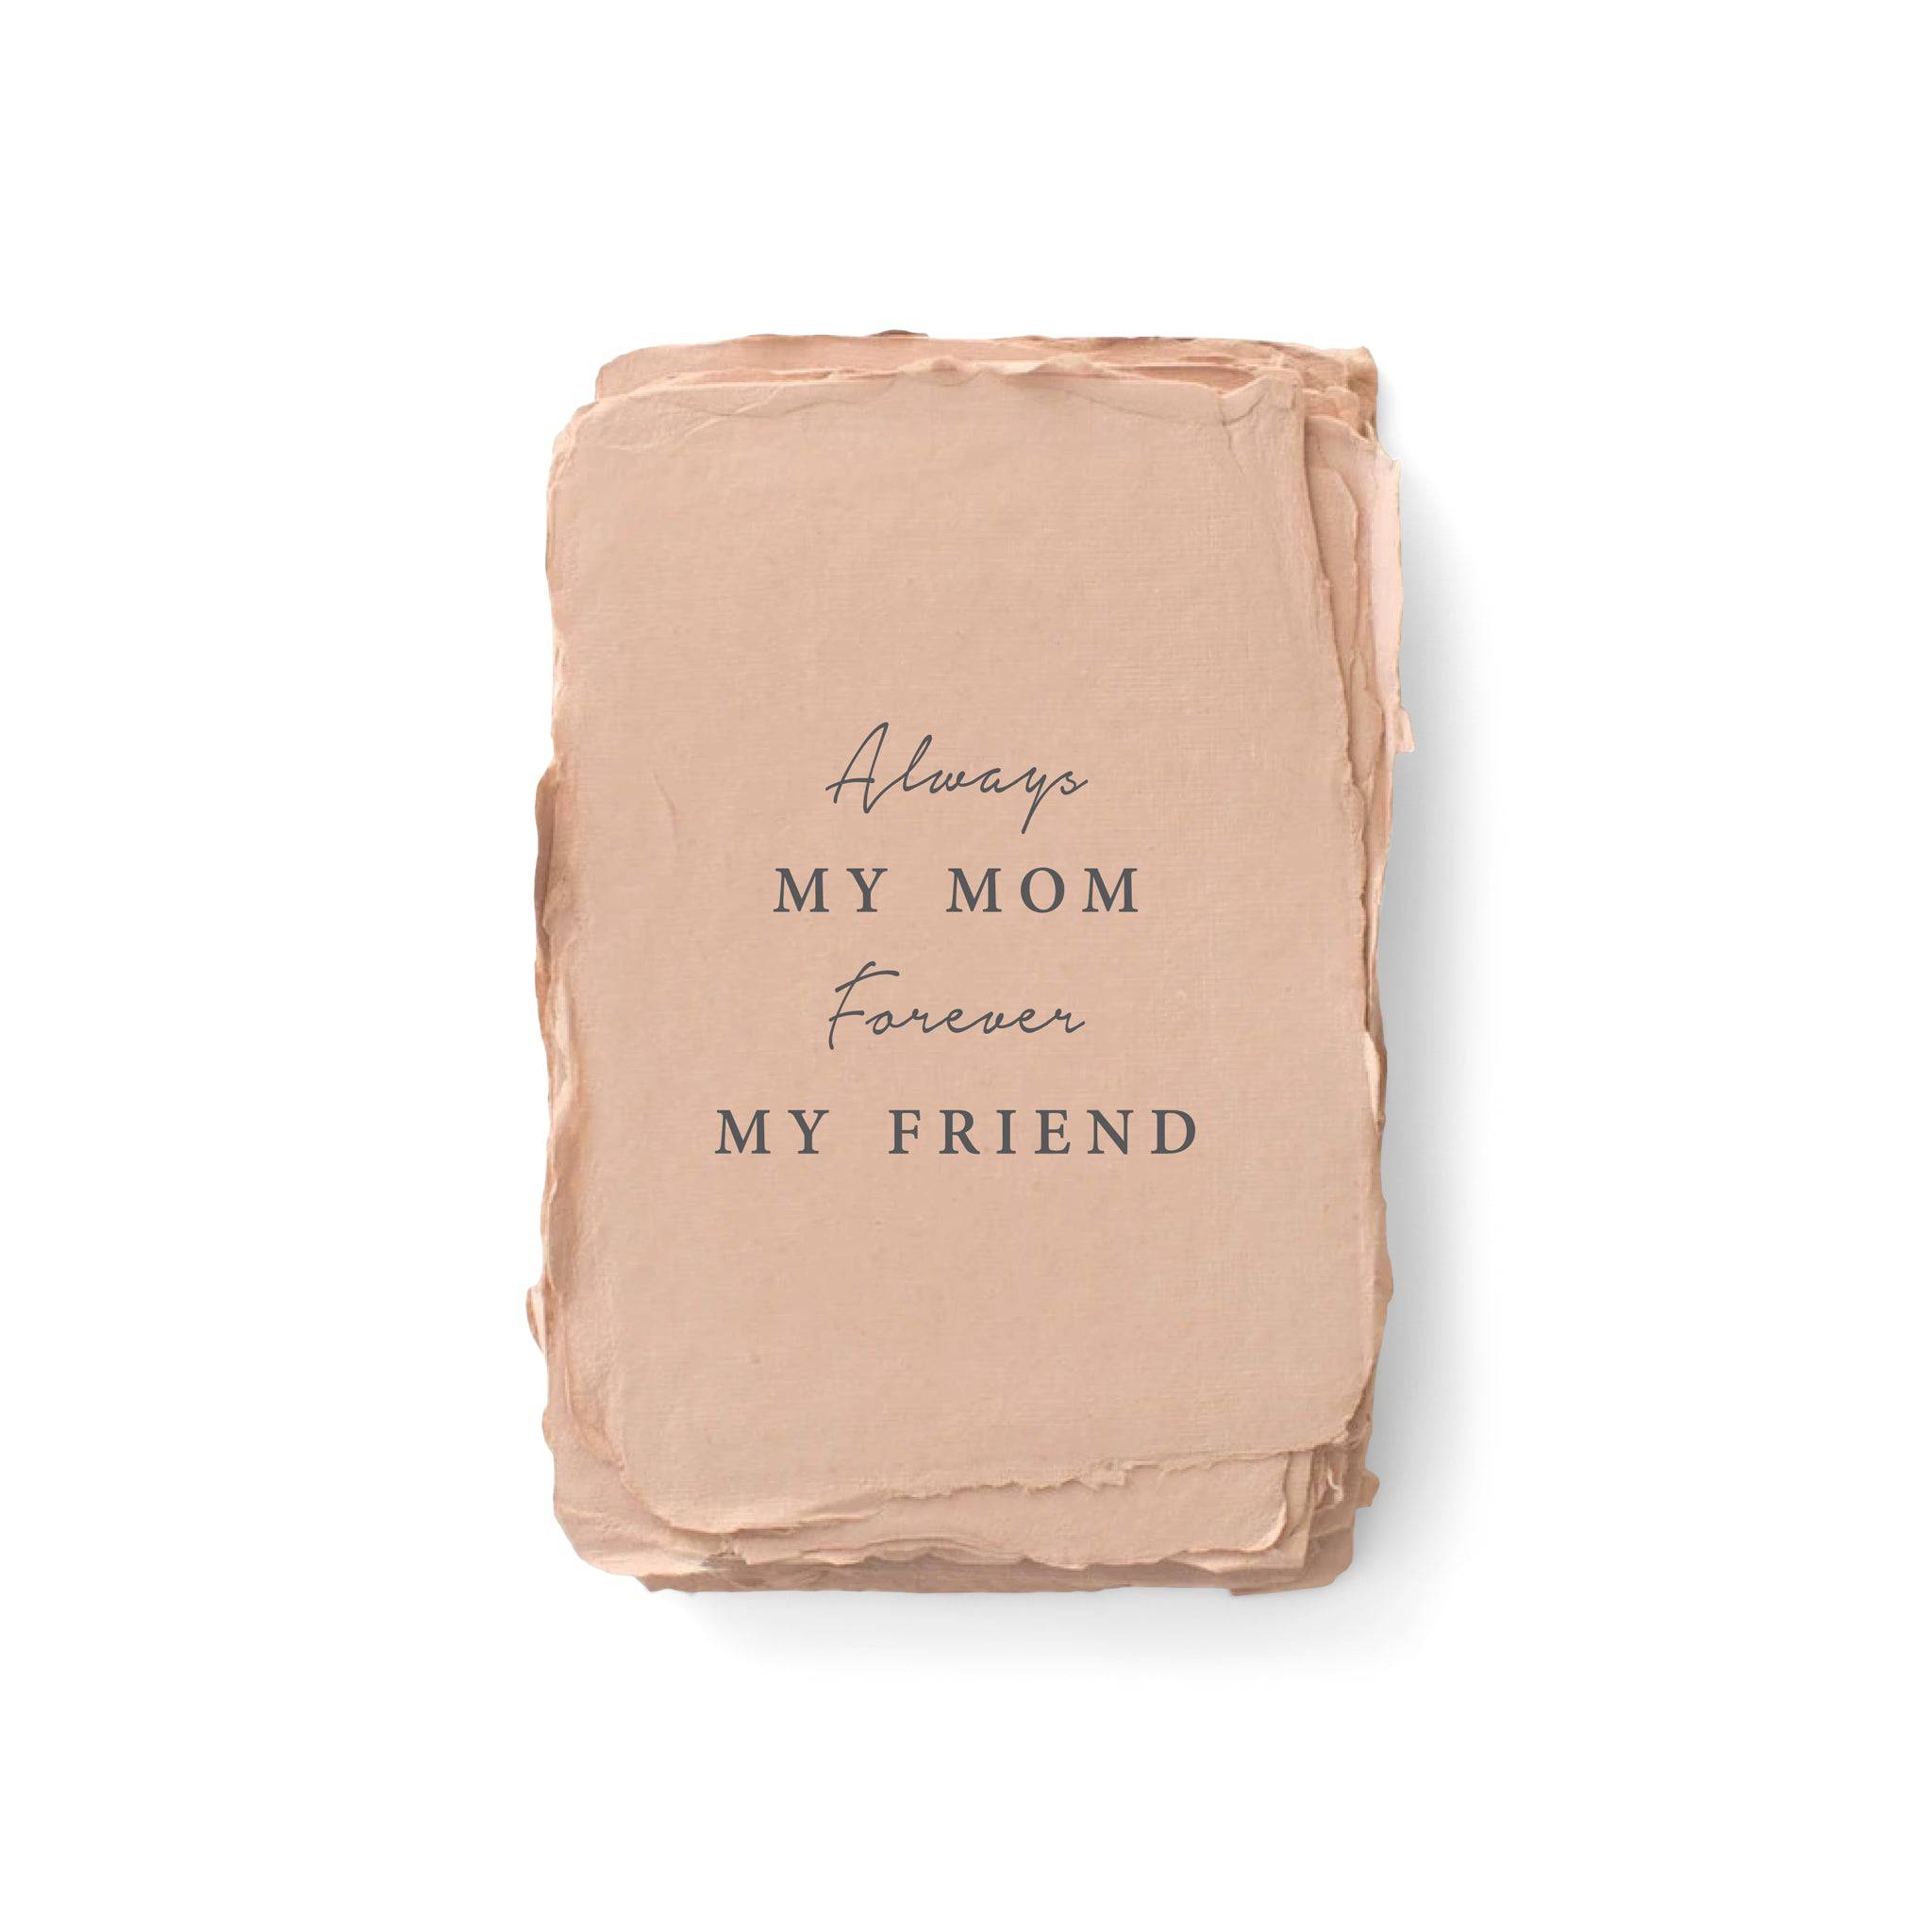 "Always My Mom, Forever My Friend" Mother's Day Card - The Gilded Witch